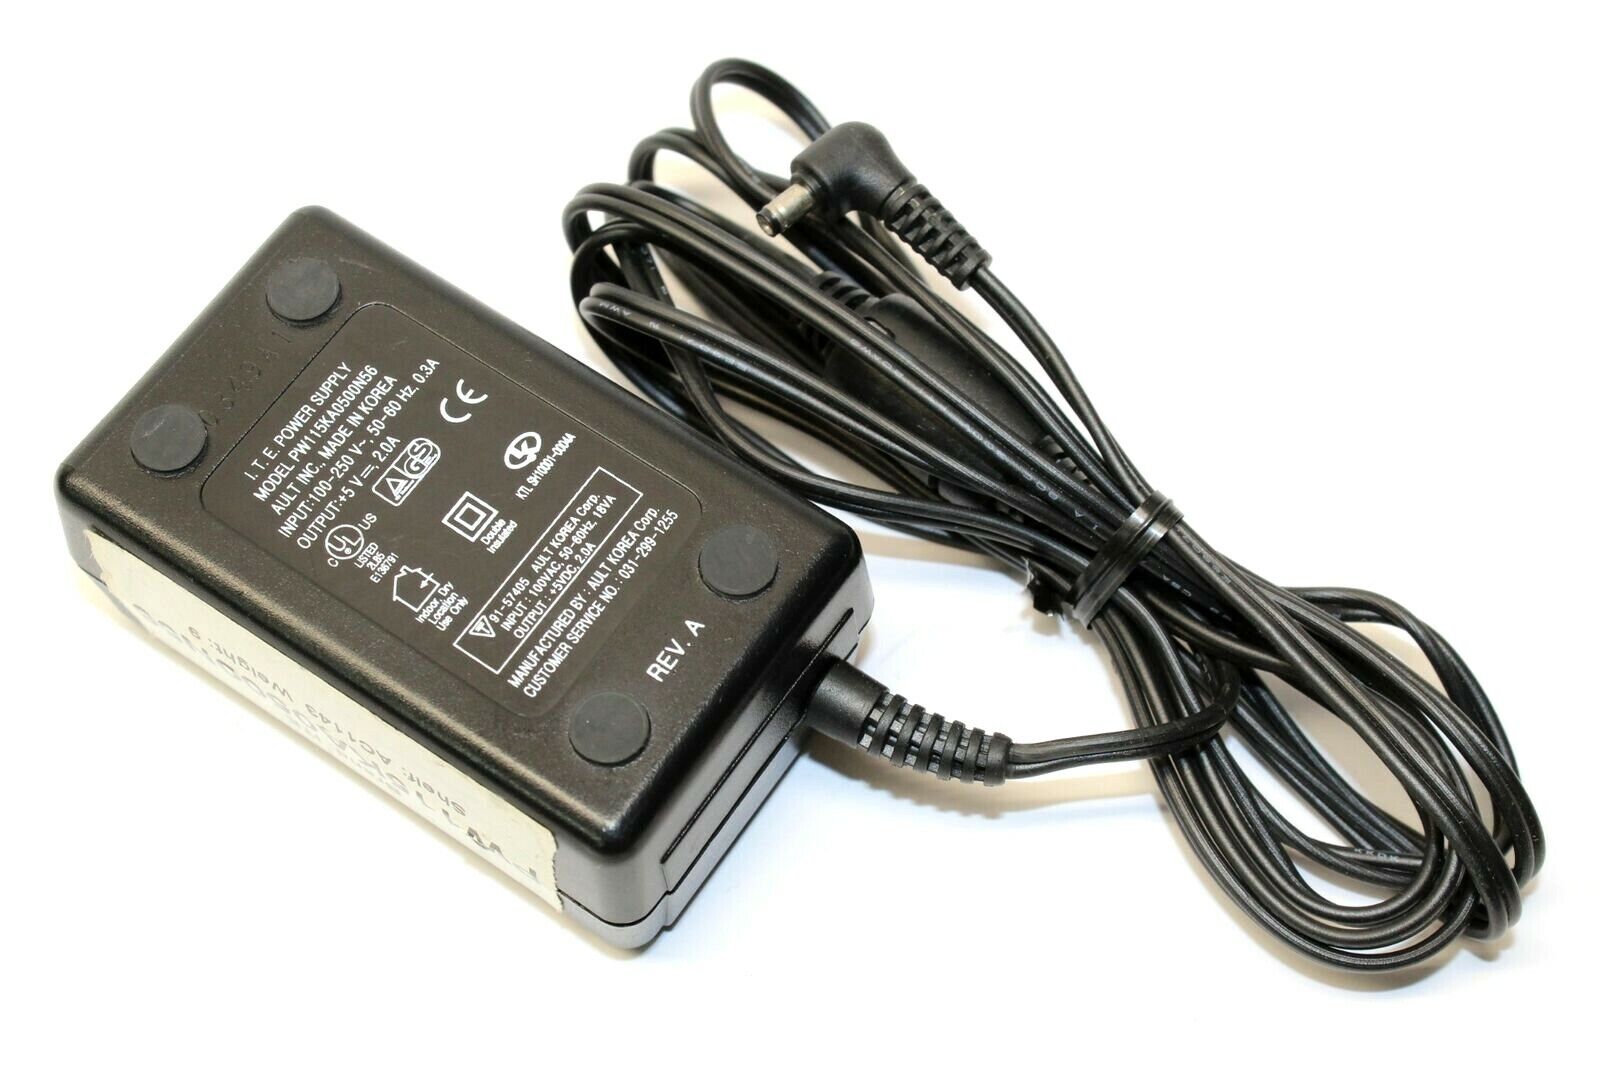 *Brand NEW*Ault 5V 2A AC Adapter PW115KA0500N56 Power Supply